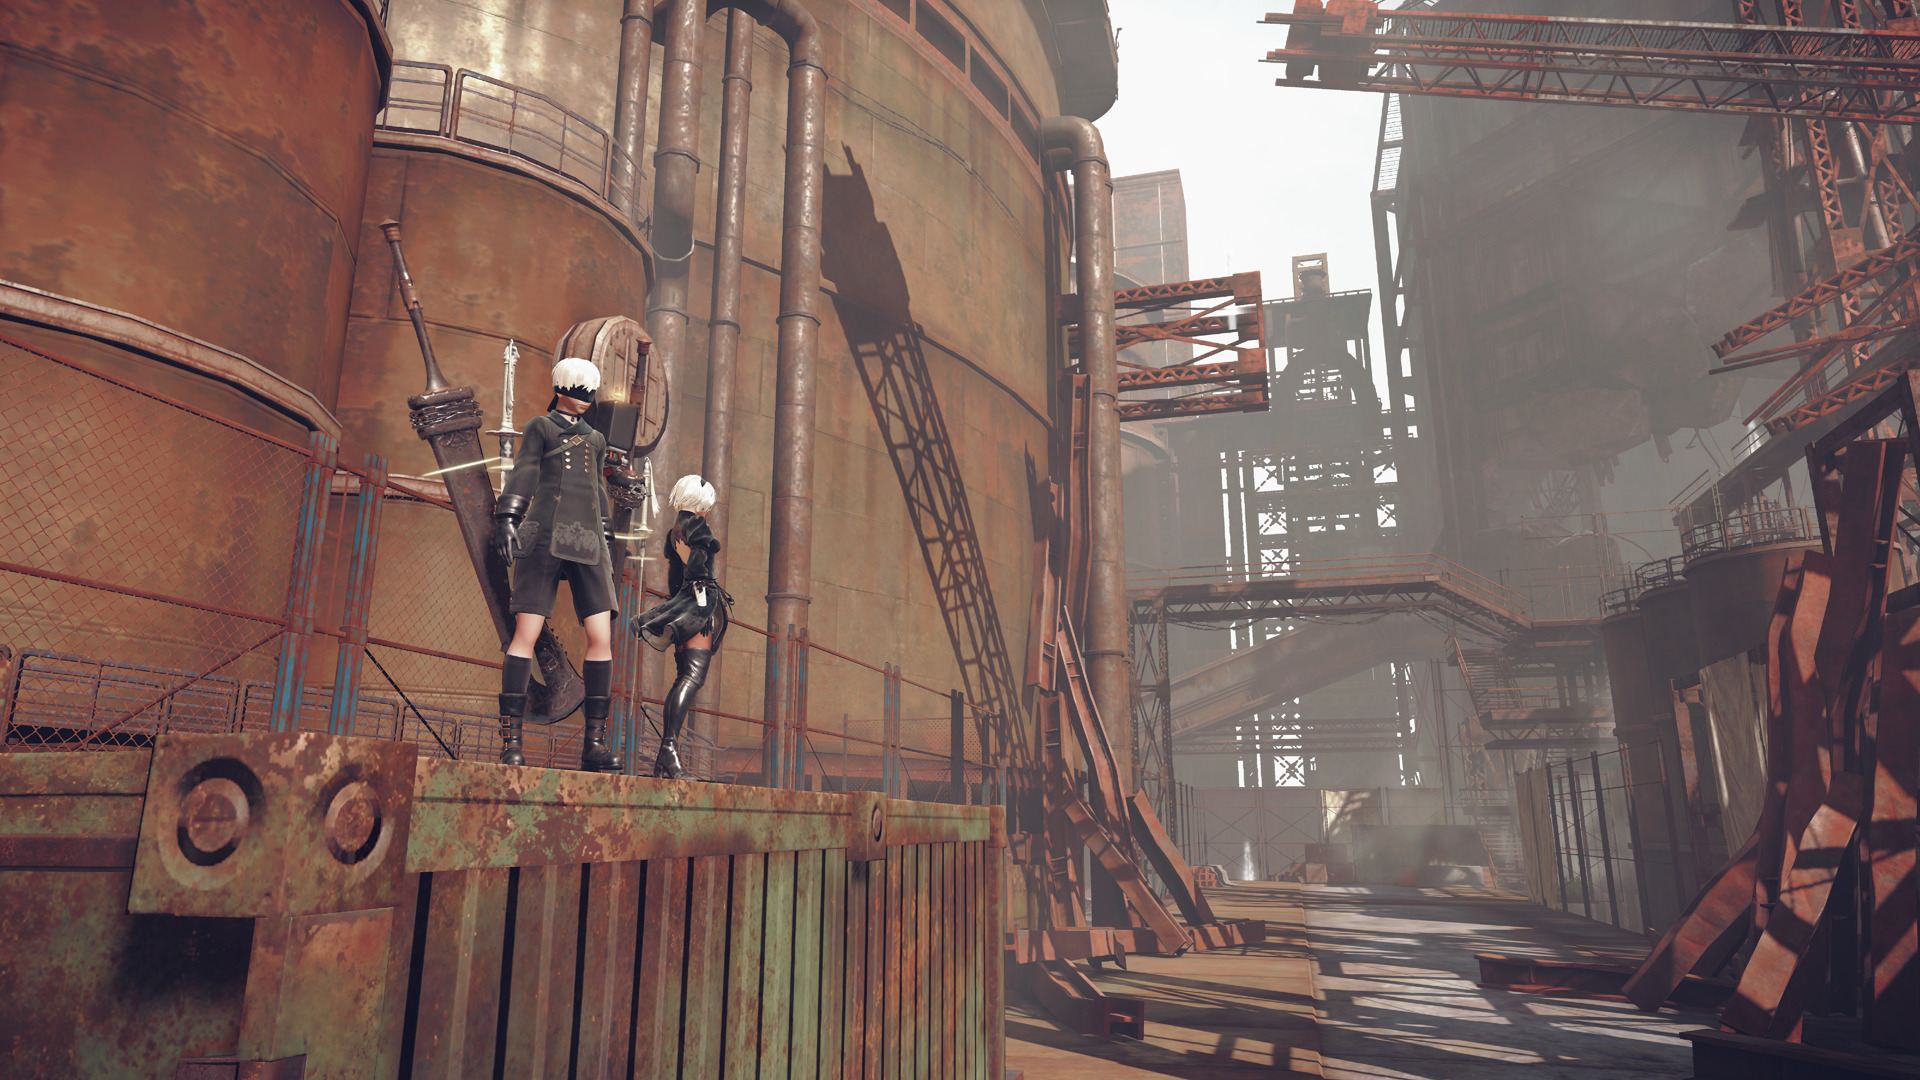 NieR: Automata - How To Unlock All The Endings